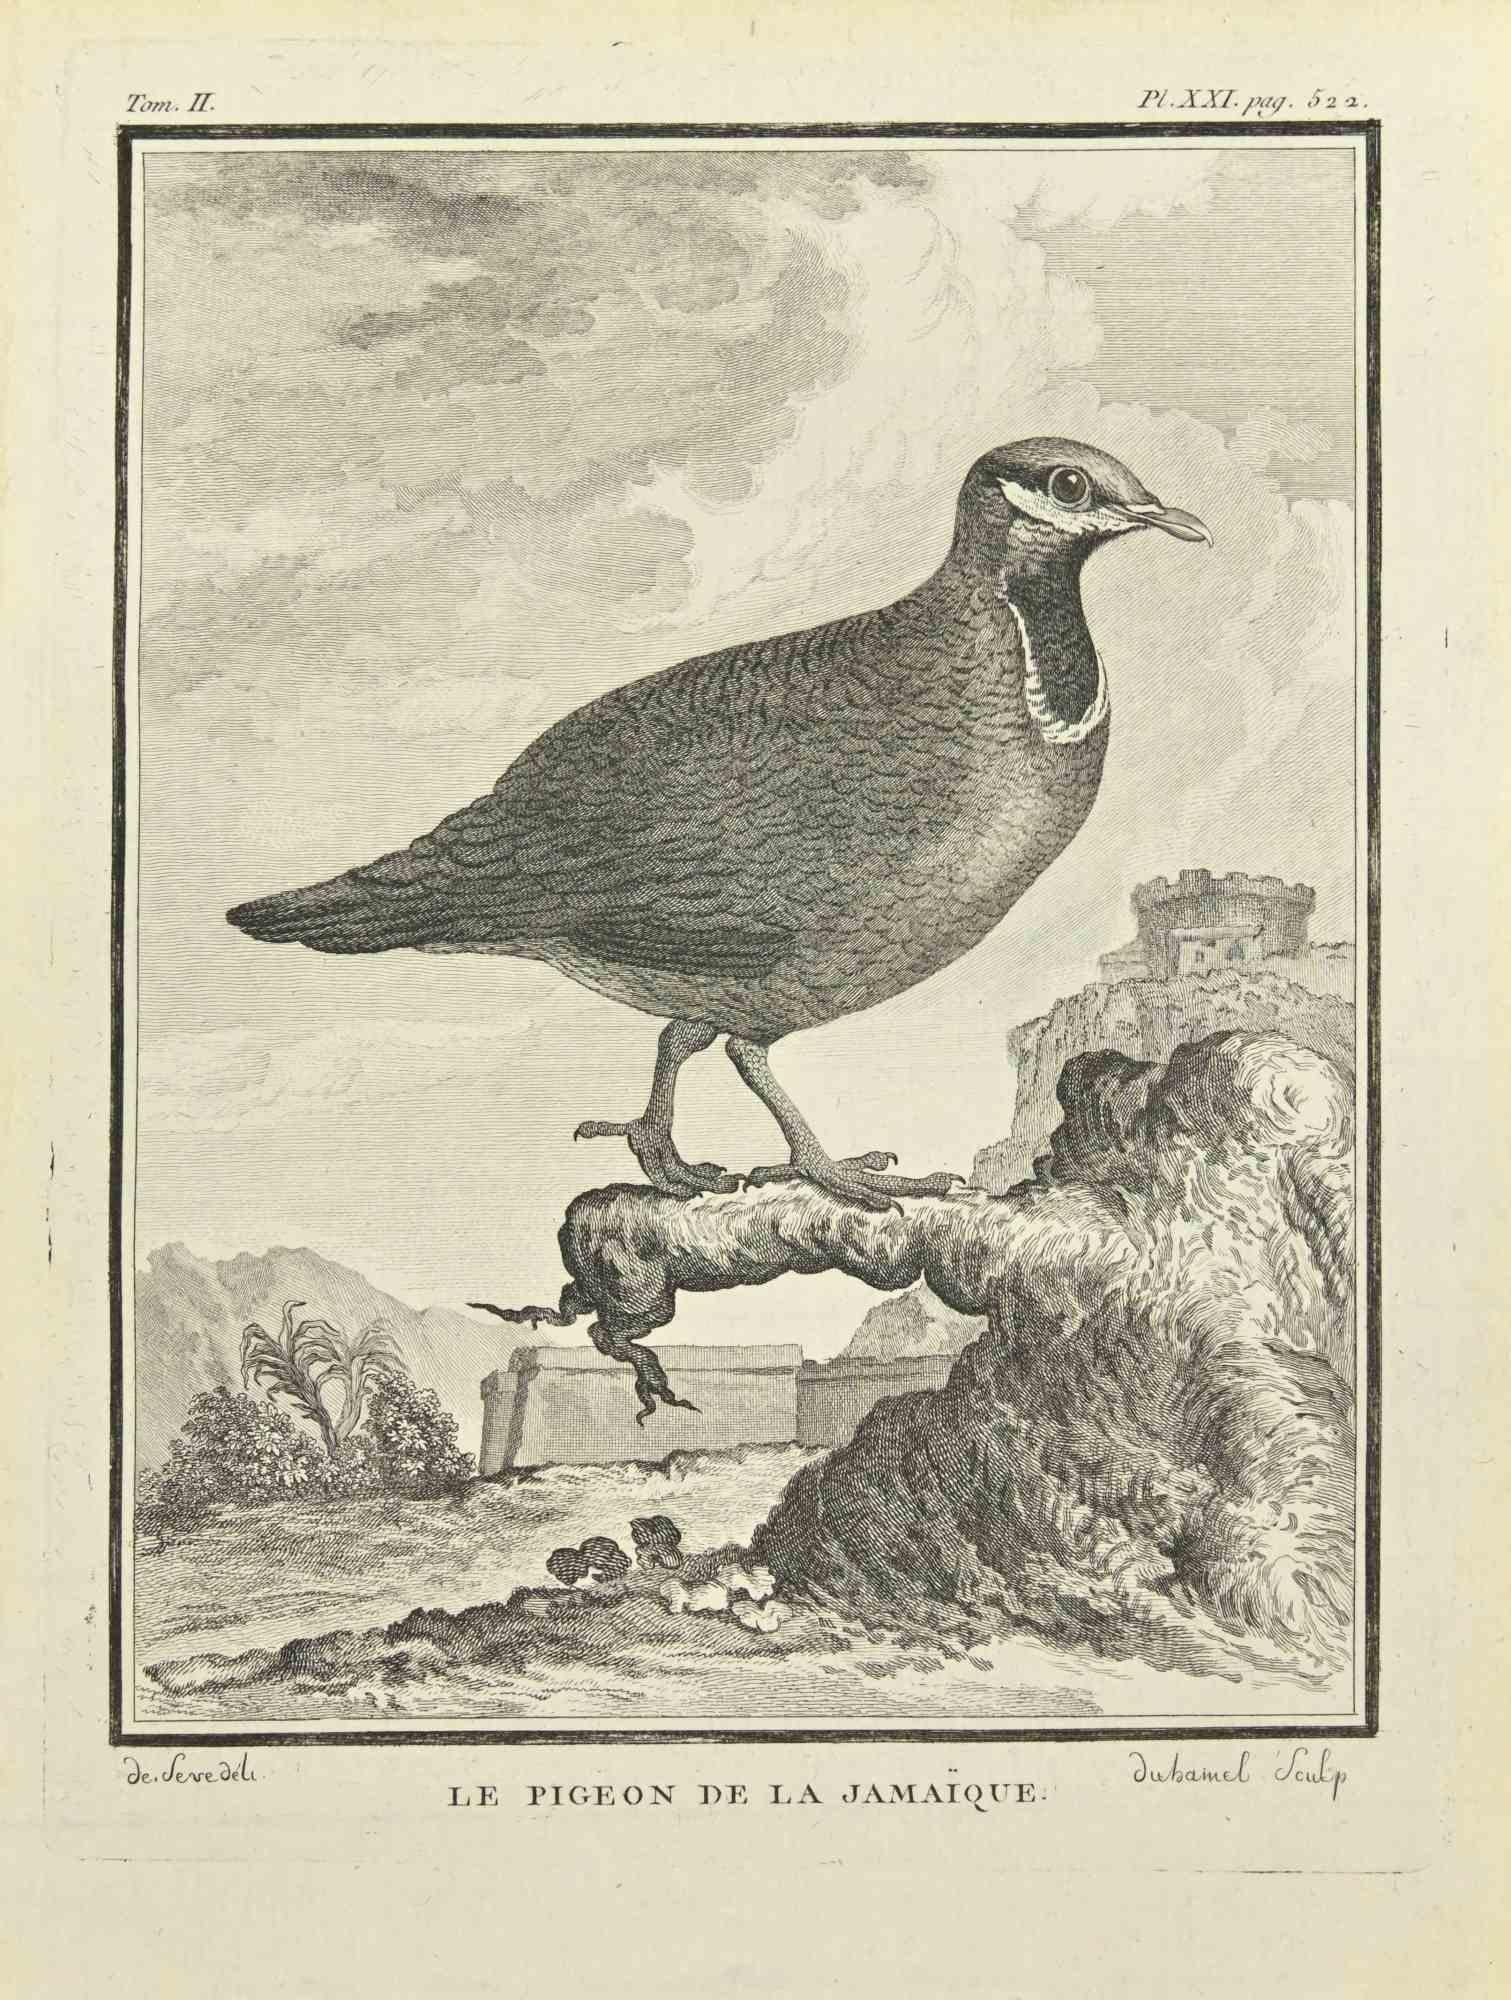 Le Pinche is an etching realized by Jean Jubainel in 1771.

It belongs to the suite "Histoire Naturelle de Buffon".

The Artist's signature is engraved lower right.

Good conditions.